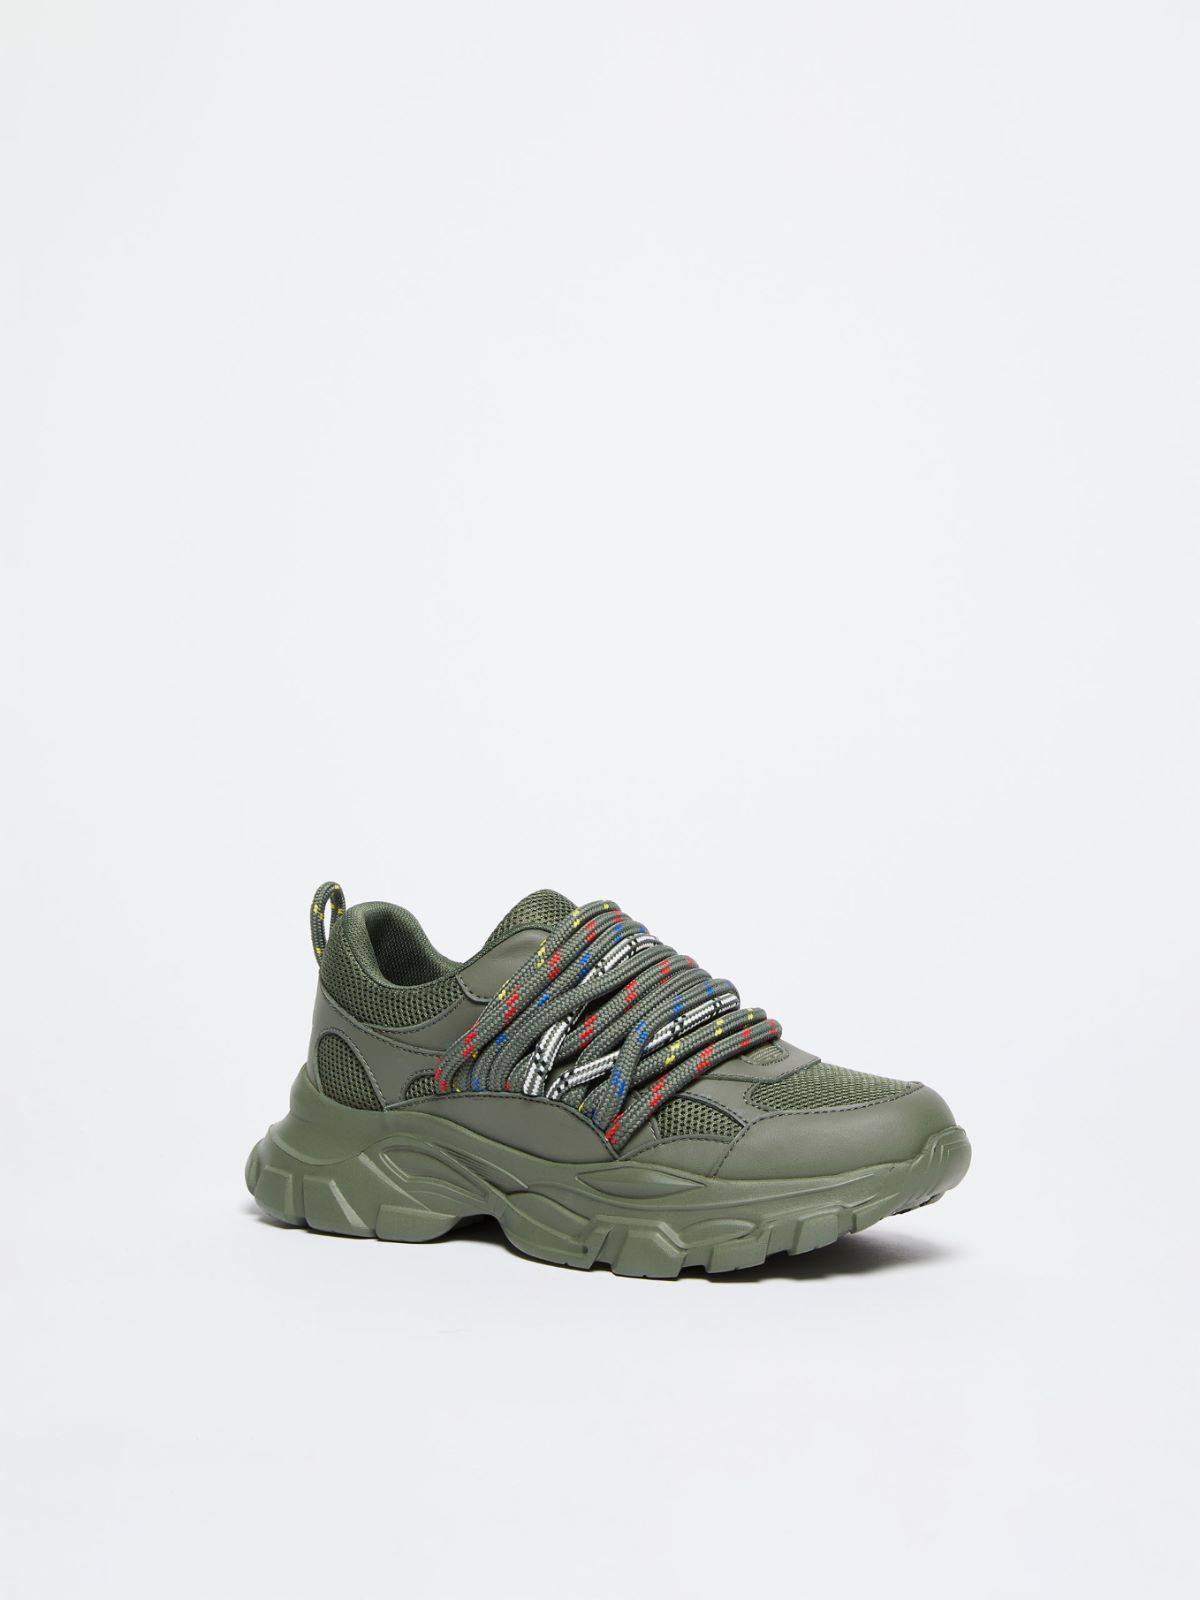 Sneakers in technical mesh and leather - DARK GREY GREEN - Weekend Max Mara - 2